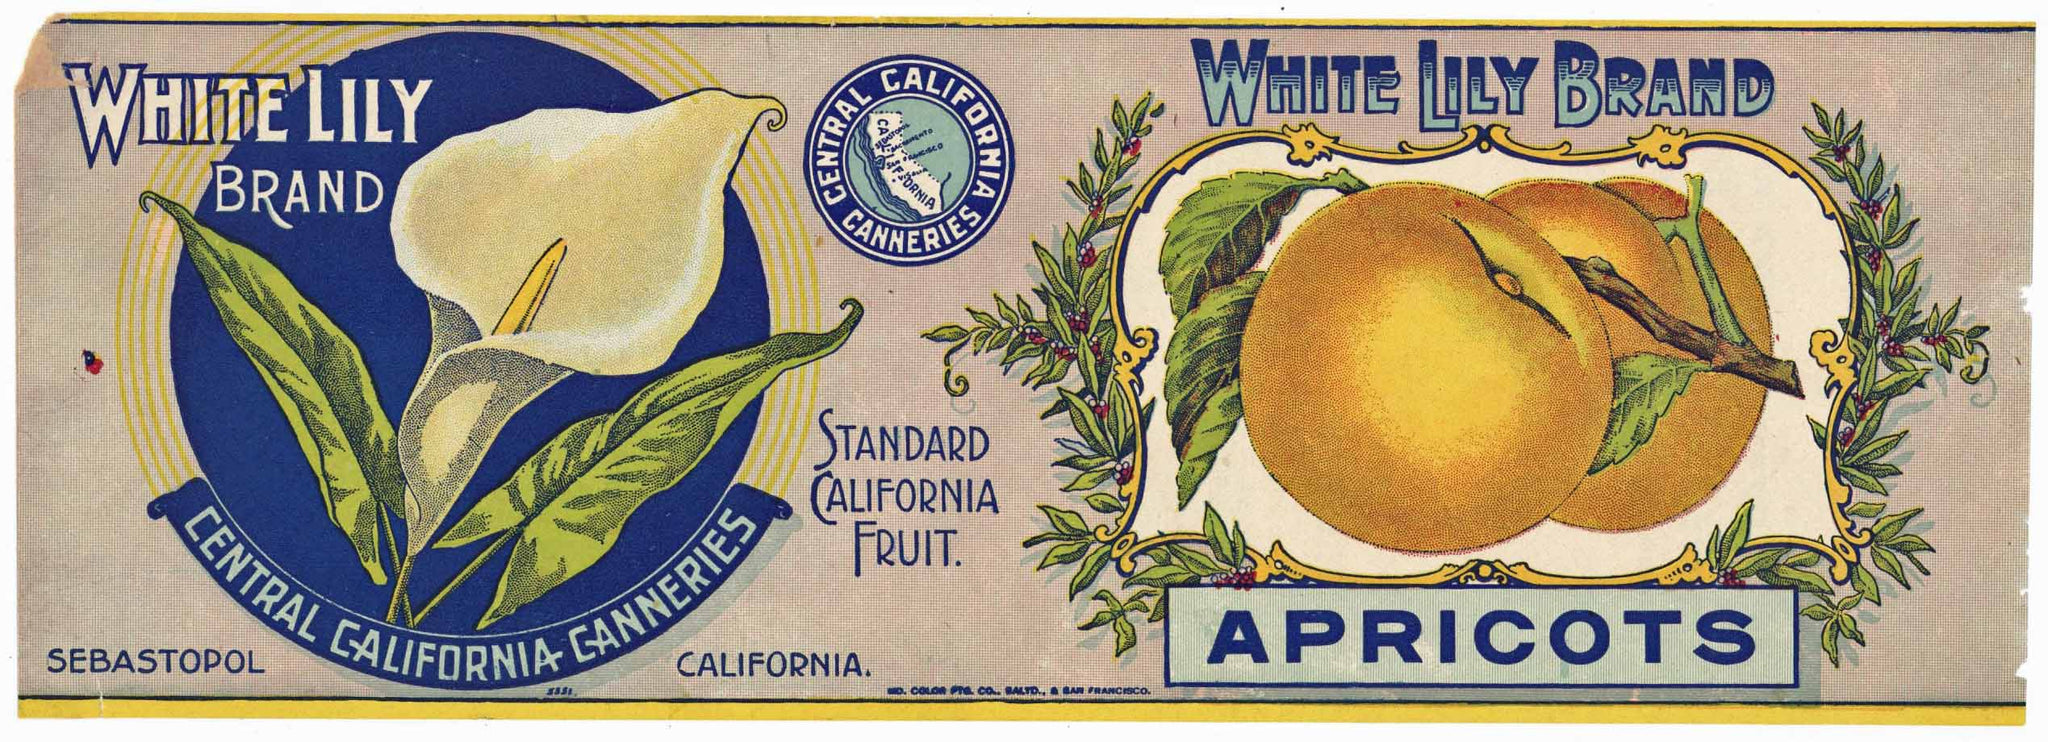 White Lily Brand Vintage Apricots Can Label